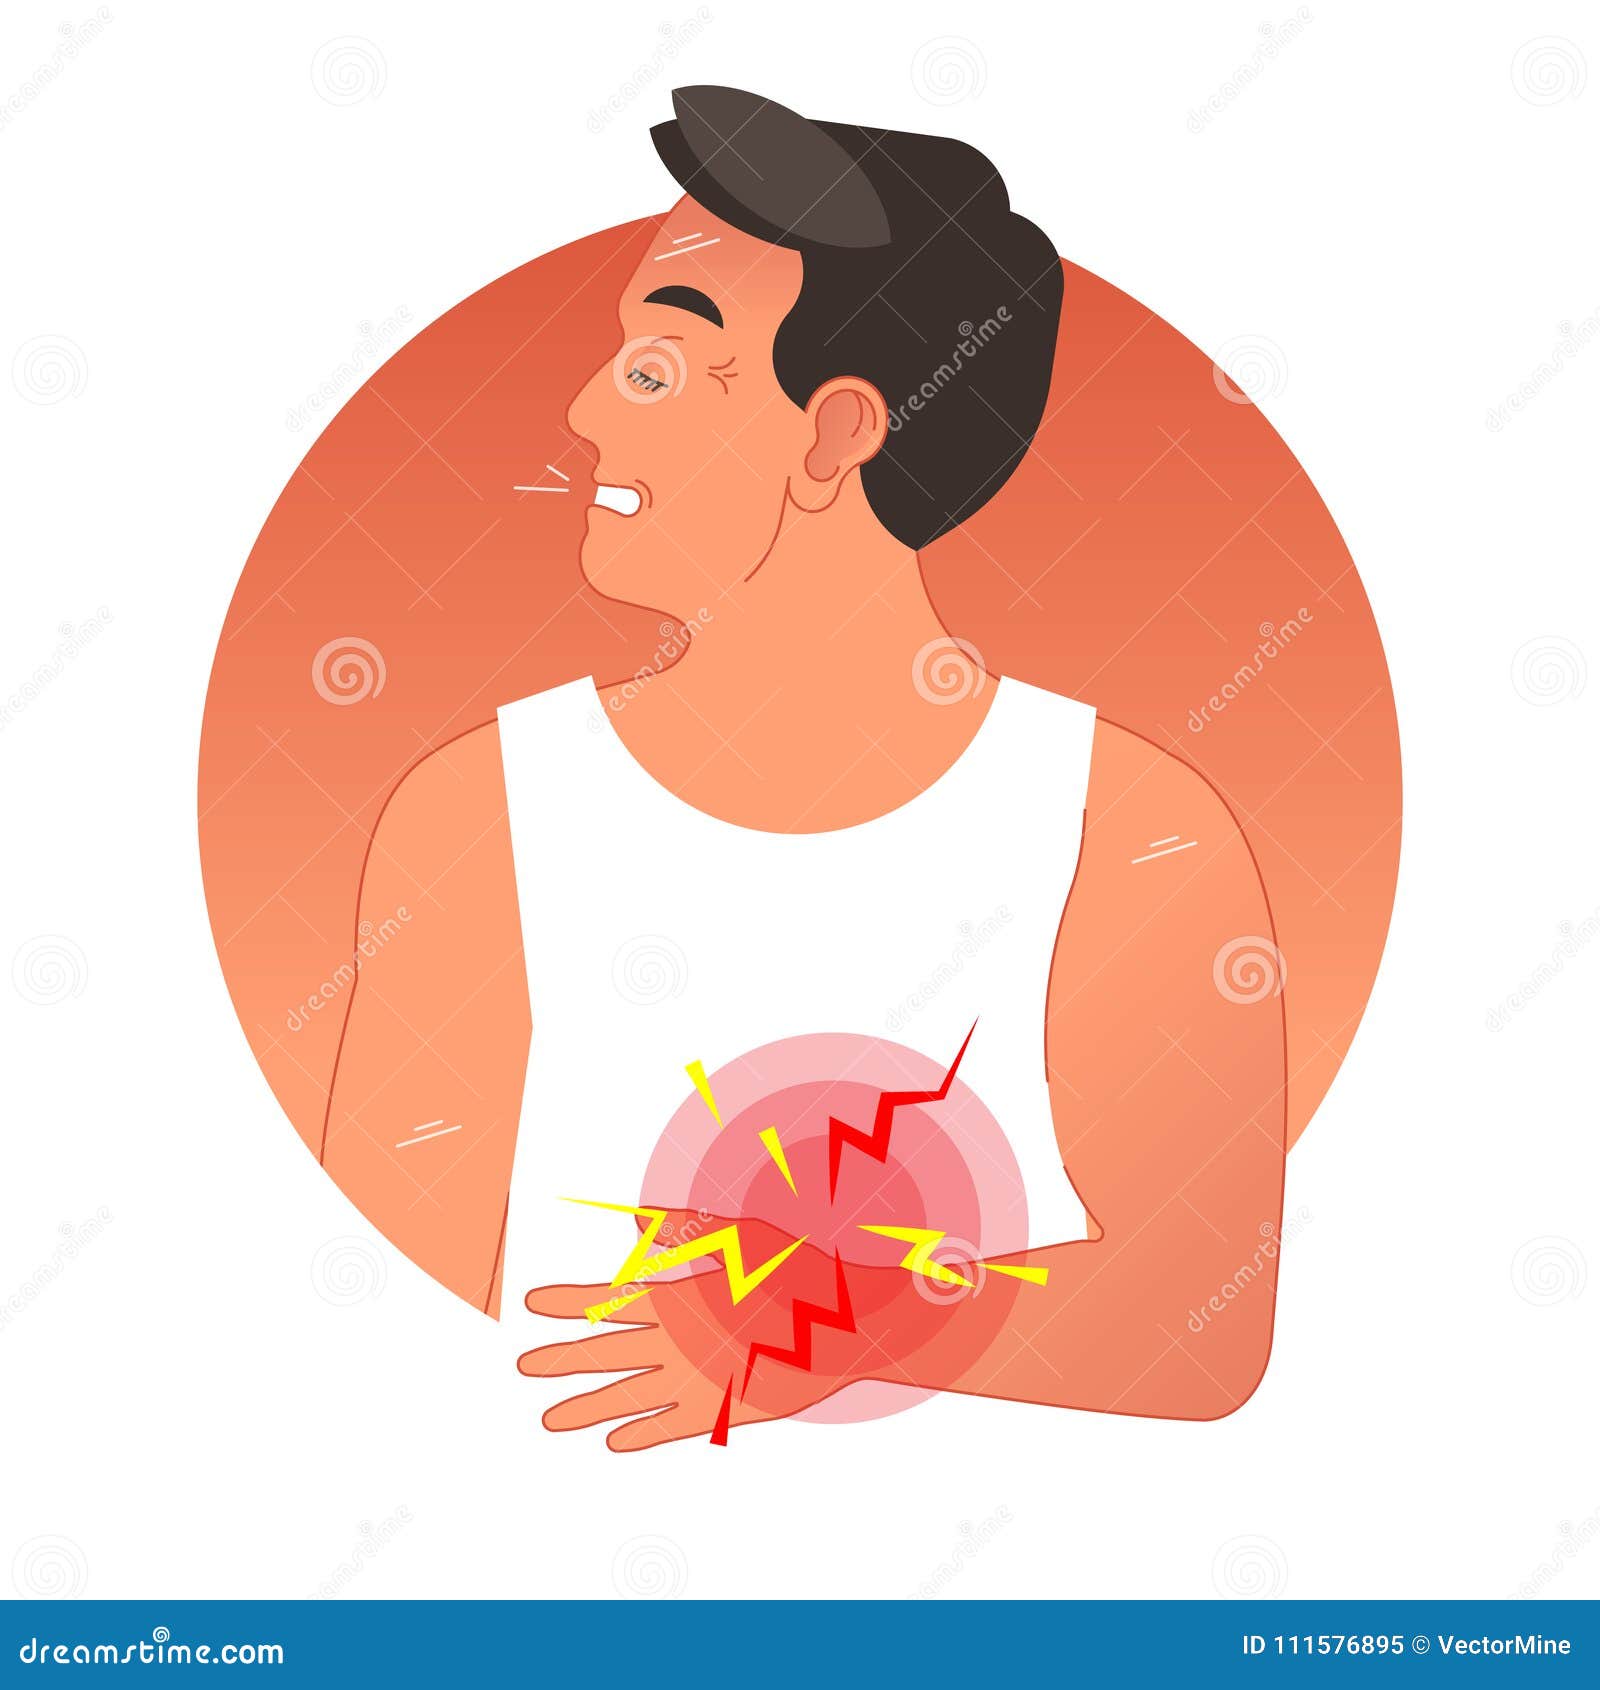 Painful Stomach Concept Vector Illustration with Human Torso. Gastric  Health Problems. Stock Vector - Illustration of body, belly: 111576895